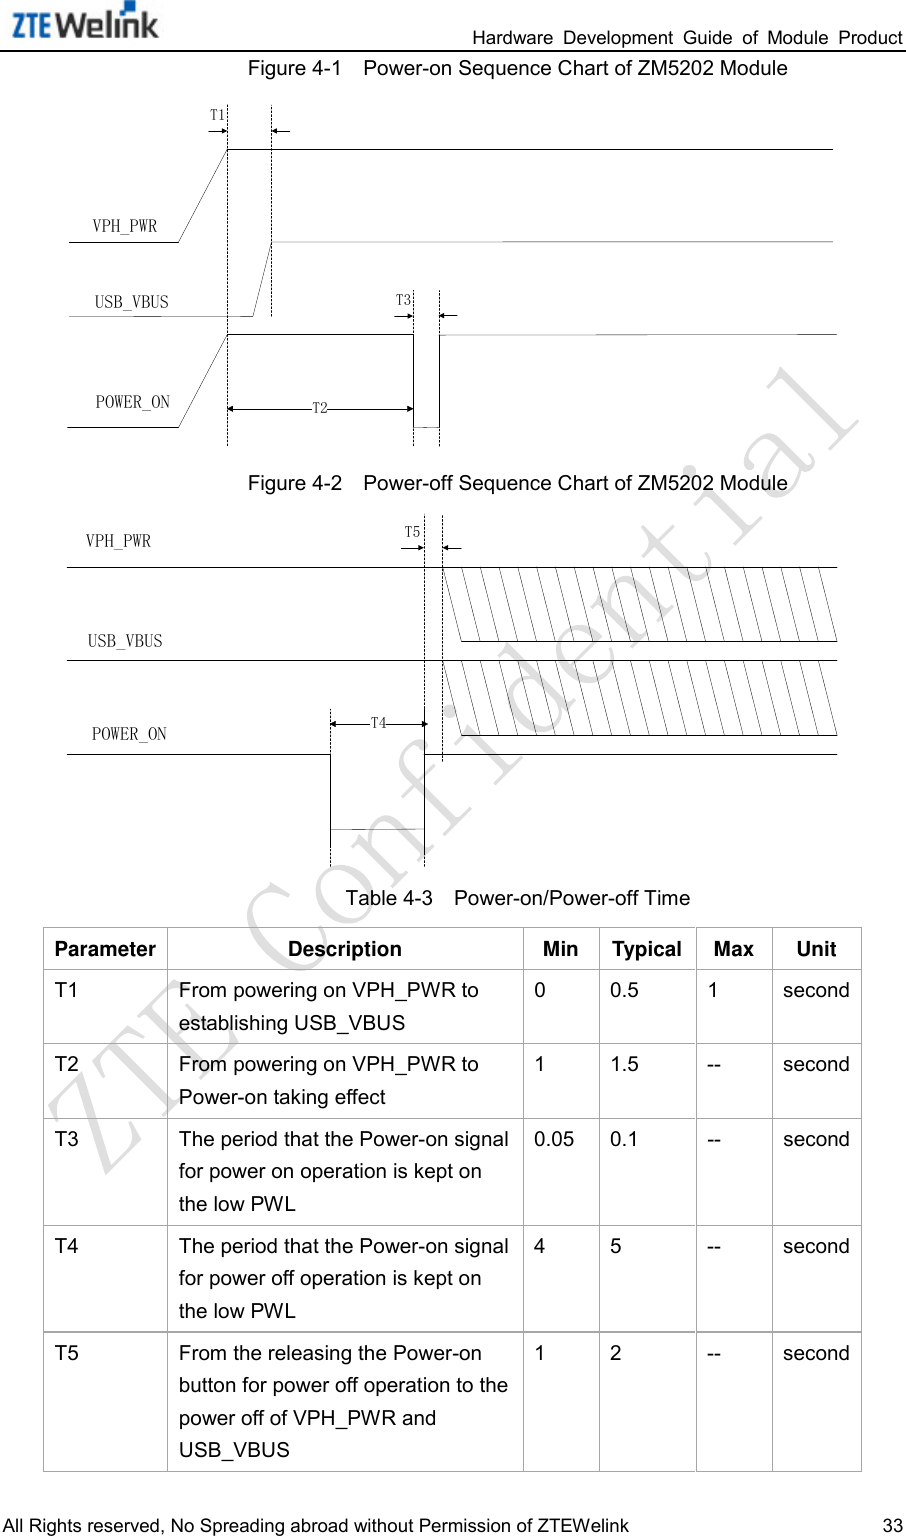                                                                 Hardware  Development  Guide  of  Module  Product All Rights reserved, No Spreading abroad without Permission of ZTEWelink 33 Figure 4-1    Power-on Sequence Chart of ZM5202 Module VPH_PWRUSB_VBUSPOWER_ONT1T2T3 Figure 4-2    Power-off Sequence Chart of ZM5202 Module POWER_ONT5T4VPH_PWRUSB_VBUS Table 4-3    Power-on/Power-off Time Parameter Description Min Typical Max Unit T1 From powering on VPH_PWR to establishing USB_VBUS 0  0.5  1  second T2 From powering on VPH_PWR to Power-on taking effect 1  1.5 -- second T3 The period that the Power-on signal for power on operation is kept on the low PWL 0.05 0.1 -- second T4 The period that the Power-on signal for power off operation is kept on the low PWL 4  5  -- second T5 From the releasing the Power-on button for power off operation to the power off of VPH_PWR and USB_VBUS 1  2  -- second 